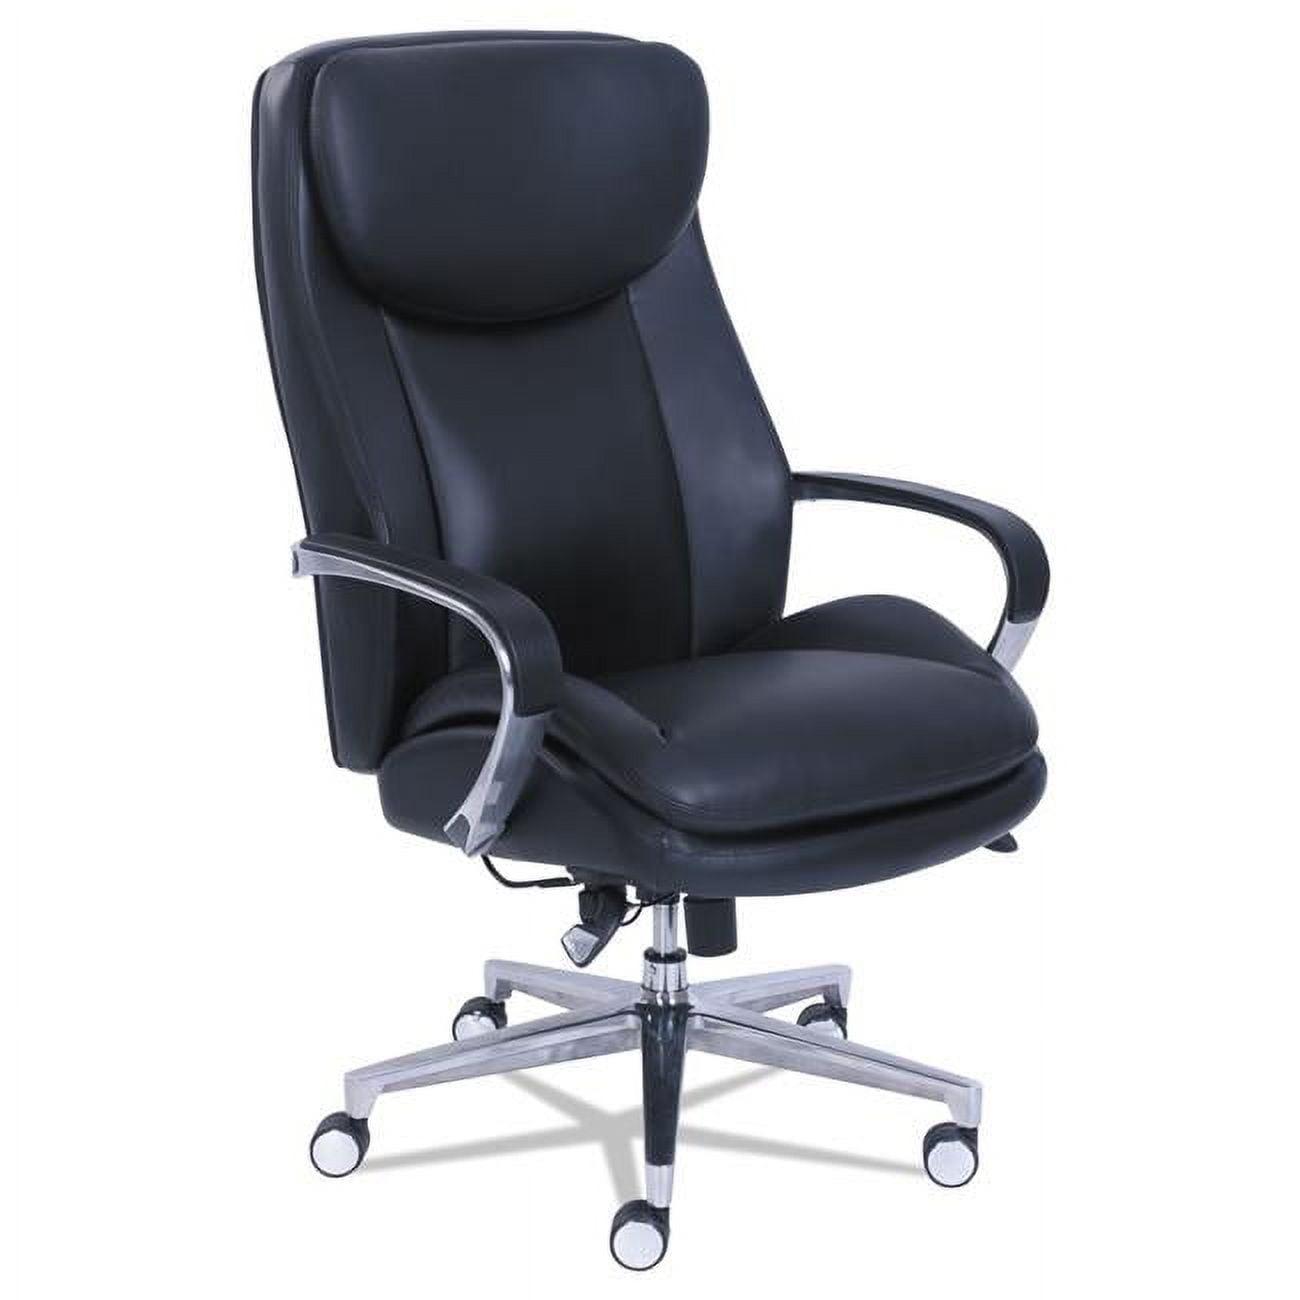 Dynamic Swivel Executive Chair in Black Bonded Leather with Lumbar Support